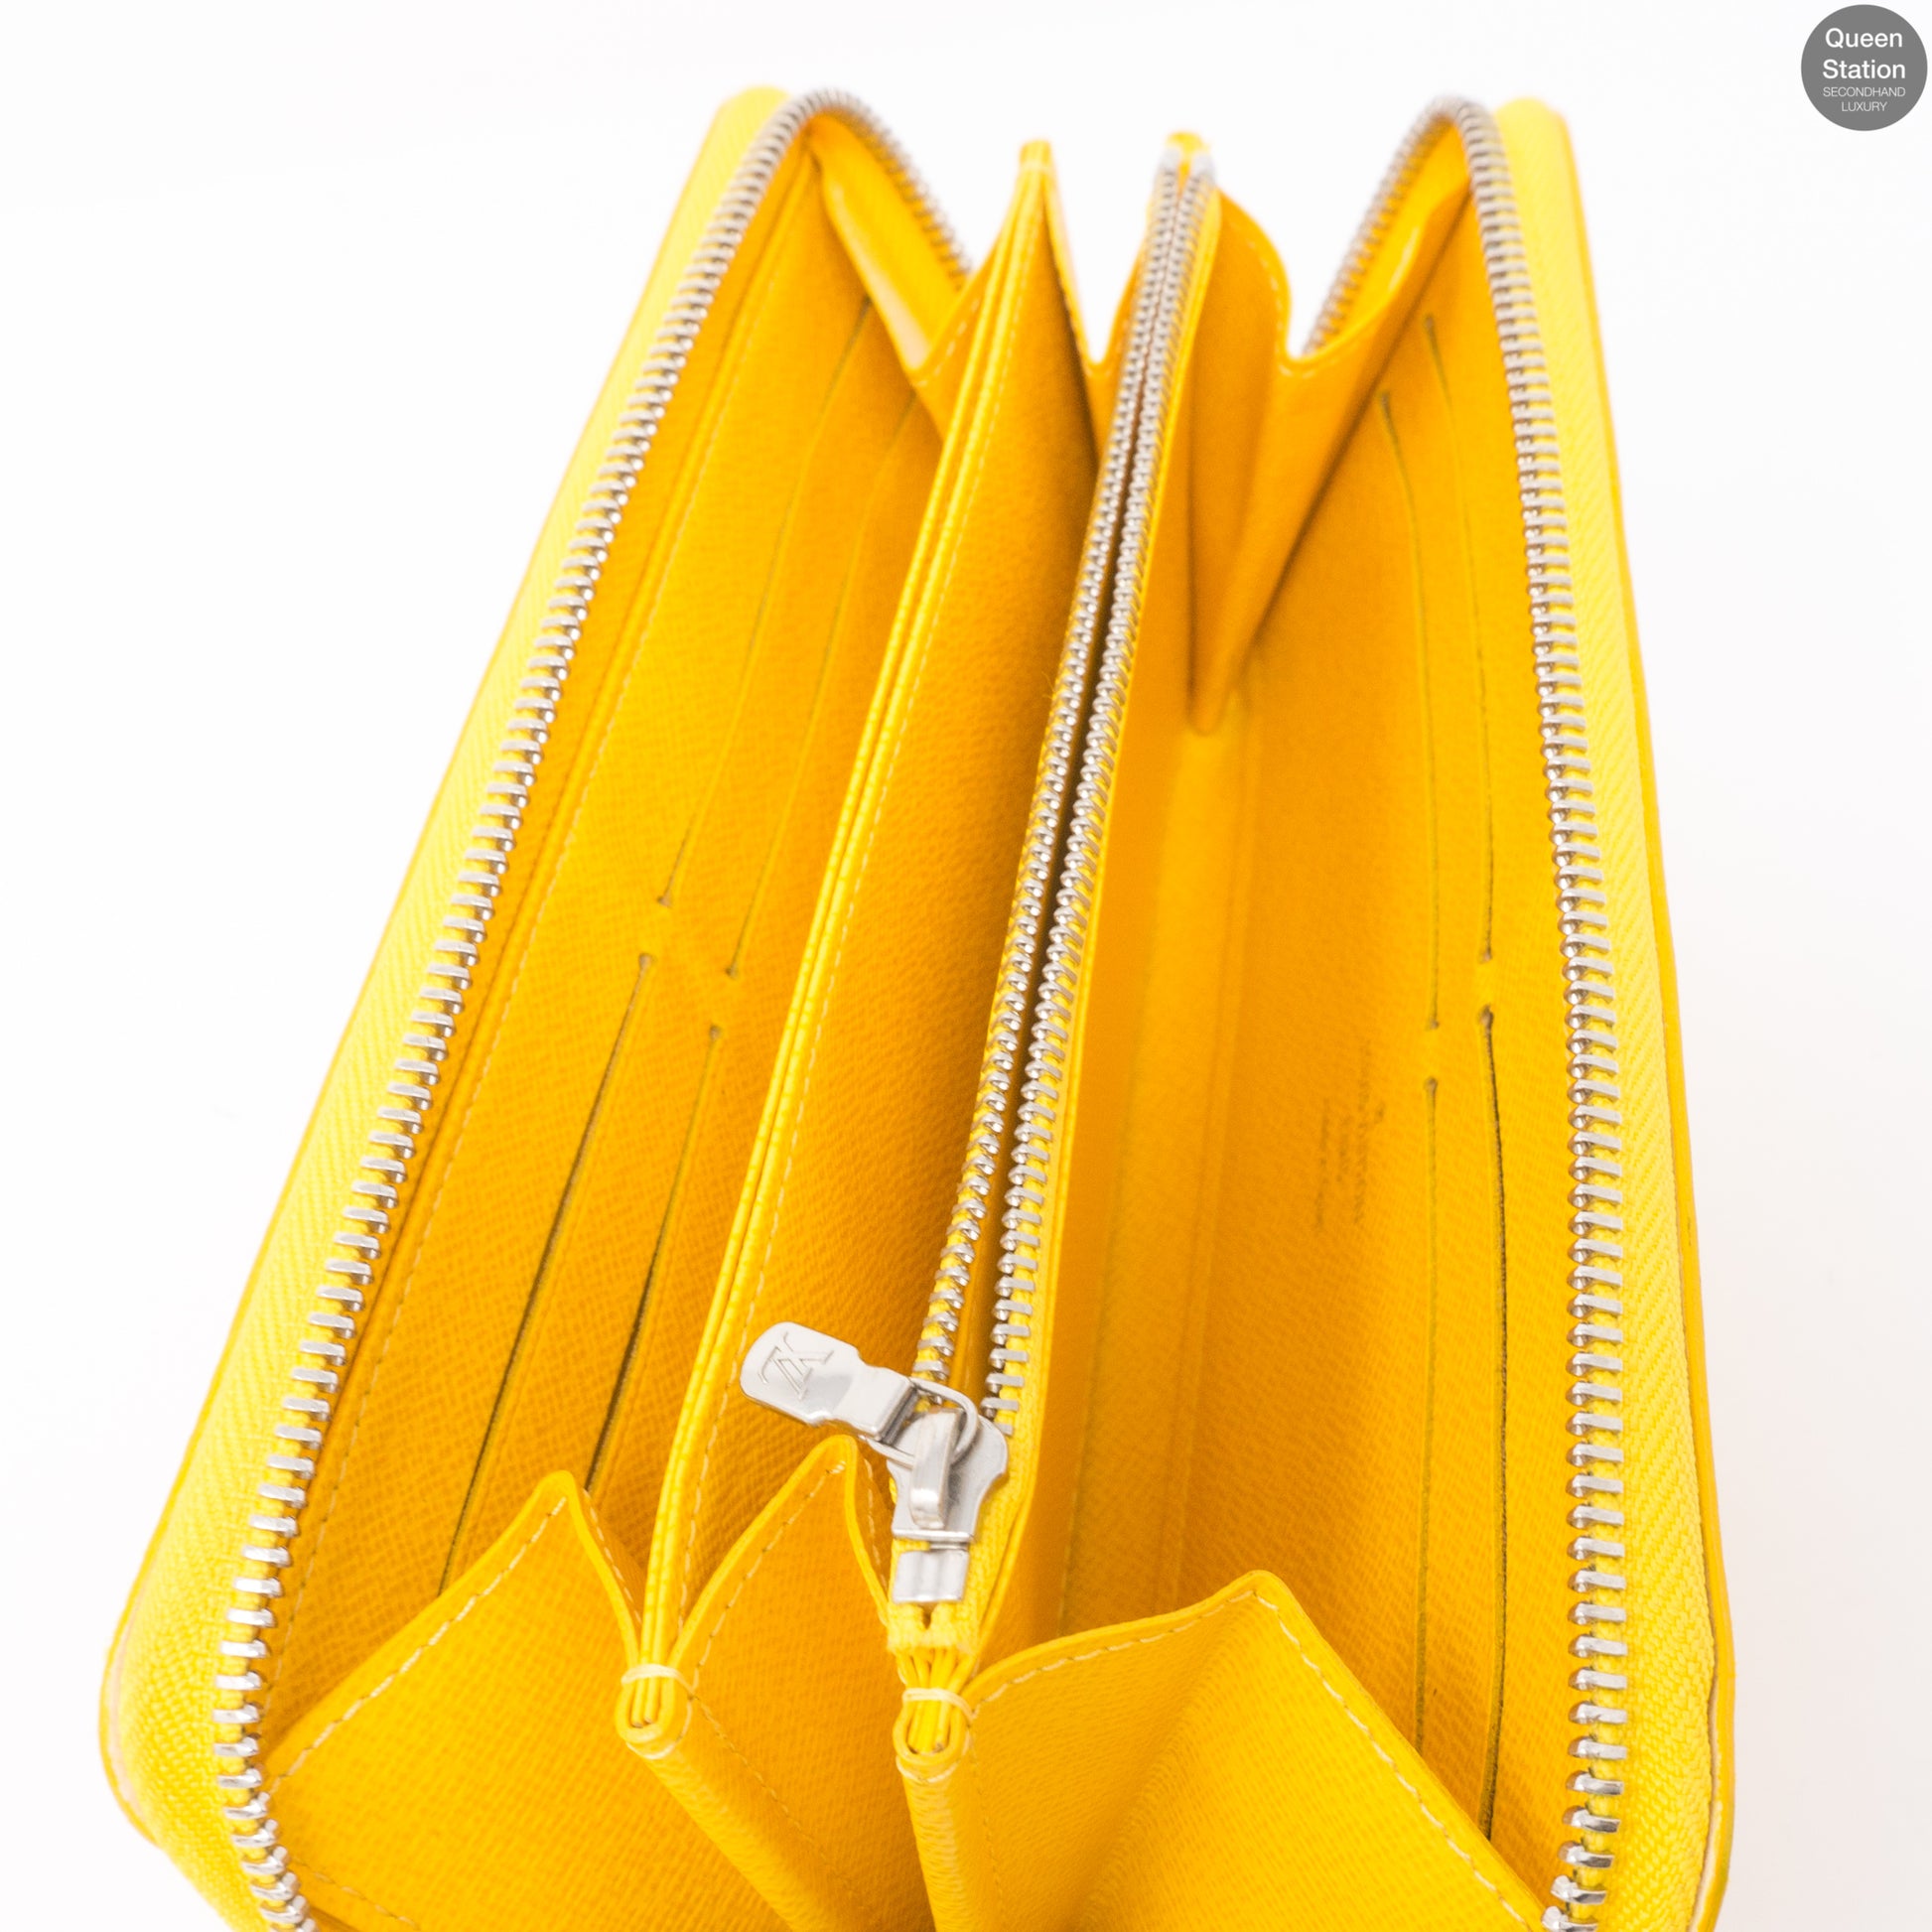 Yellow epi leather wallet, was wondering how common/rare these are